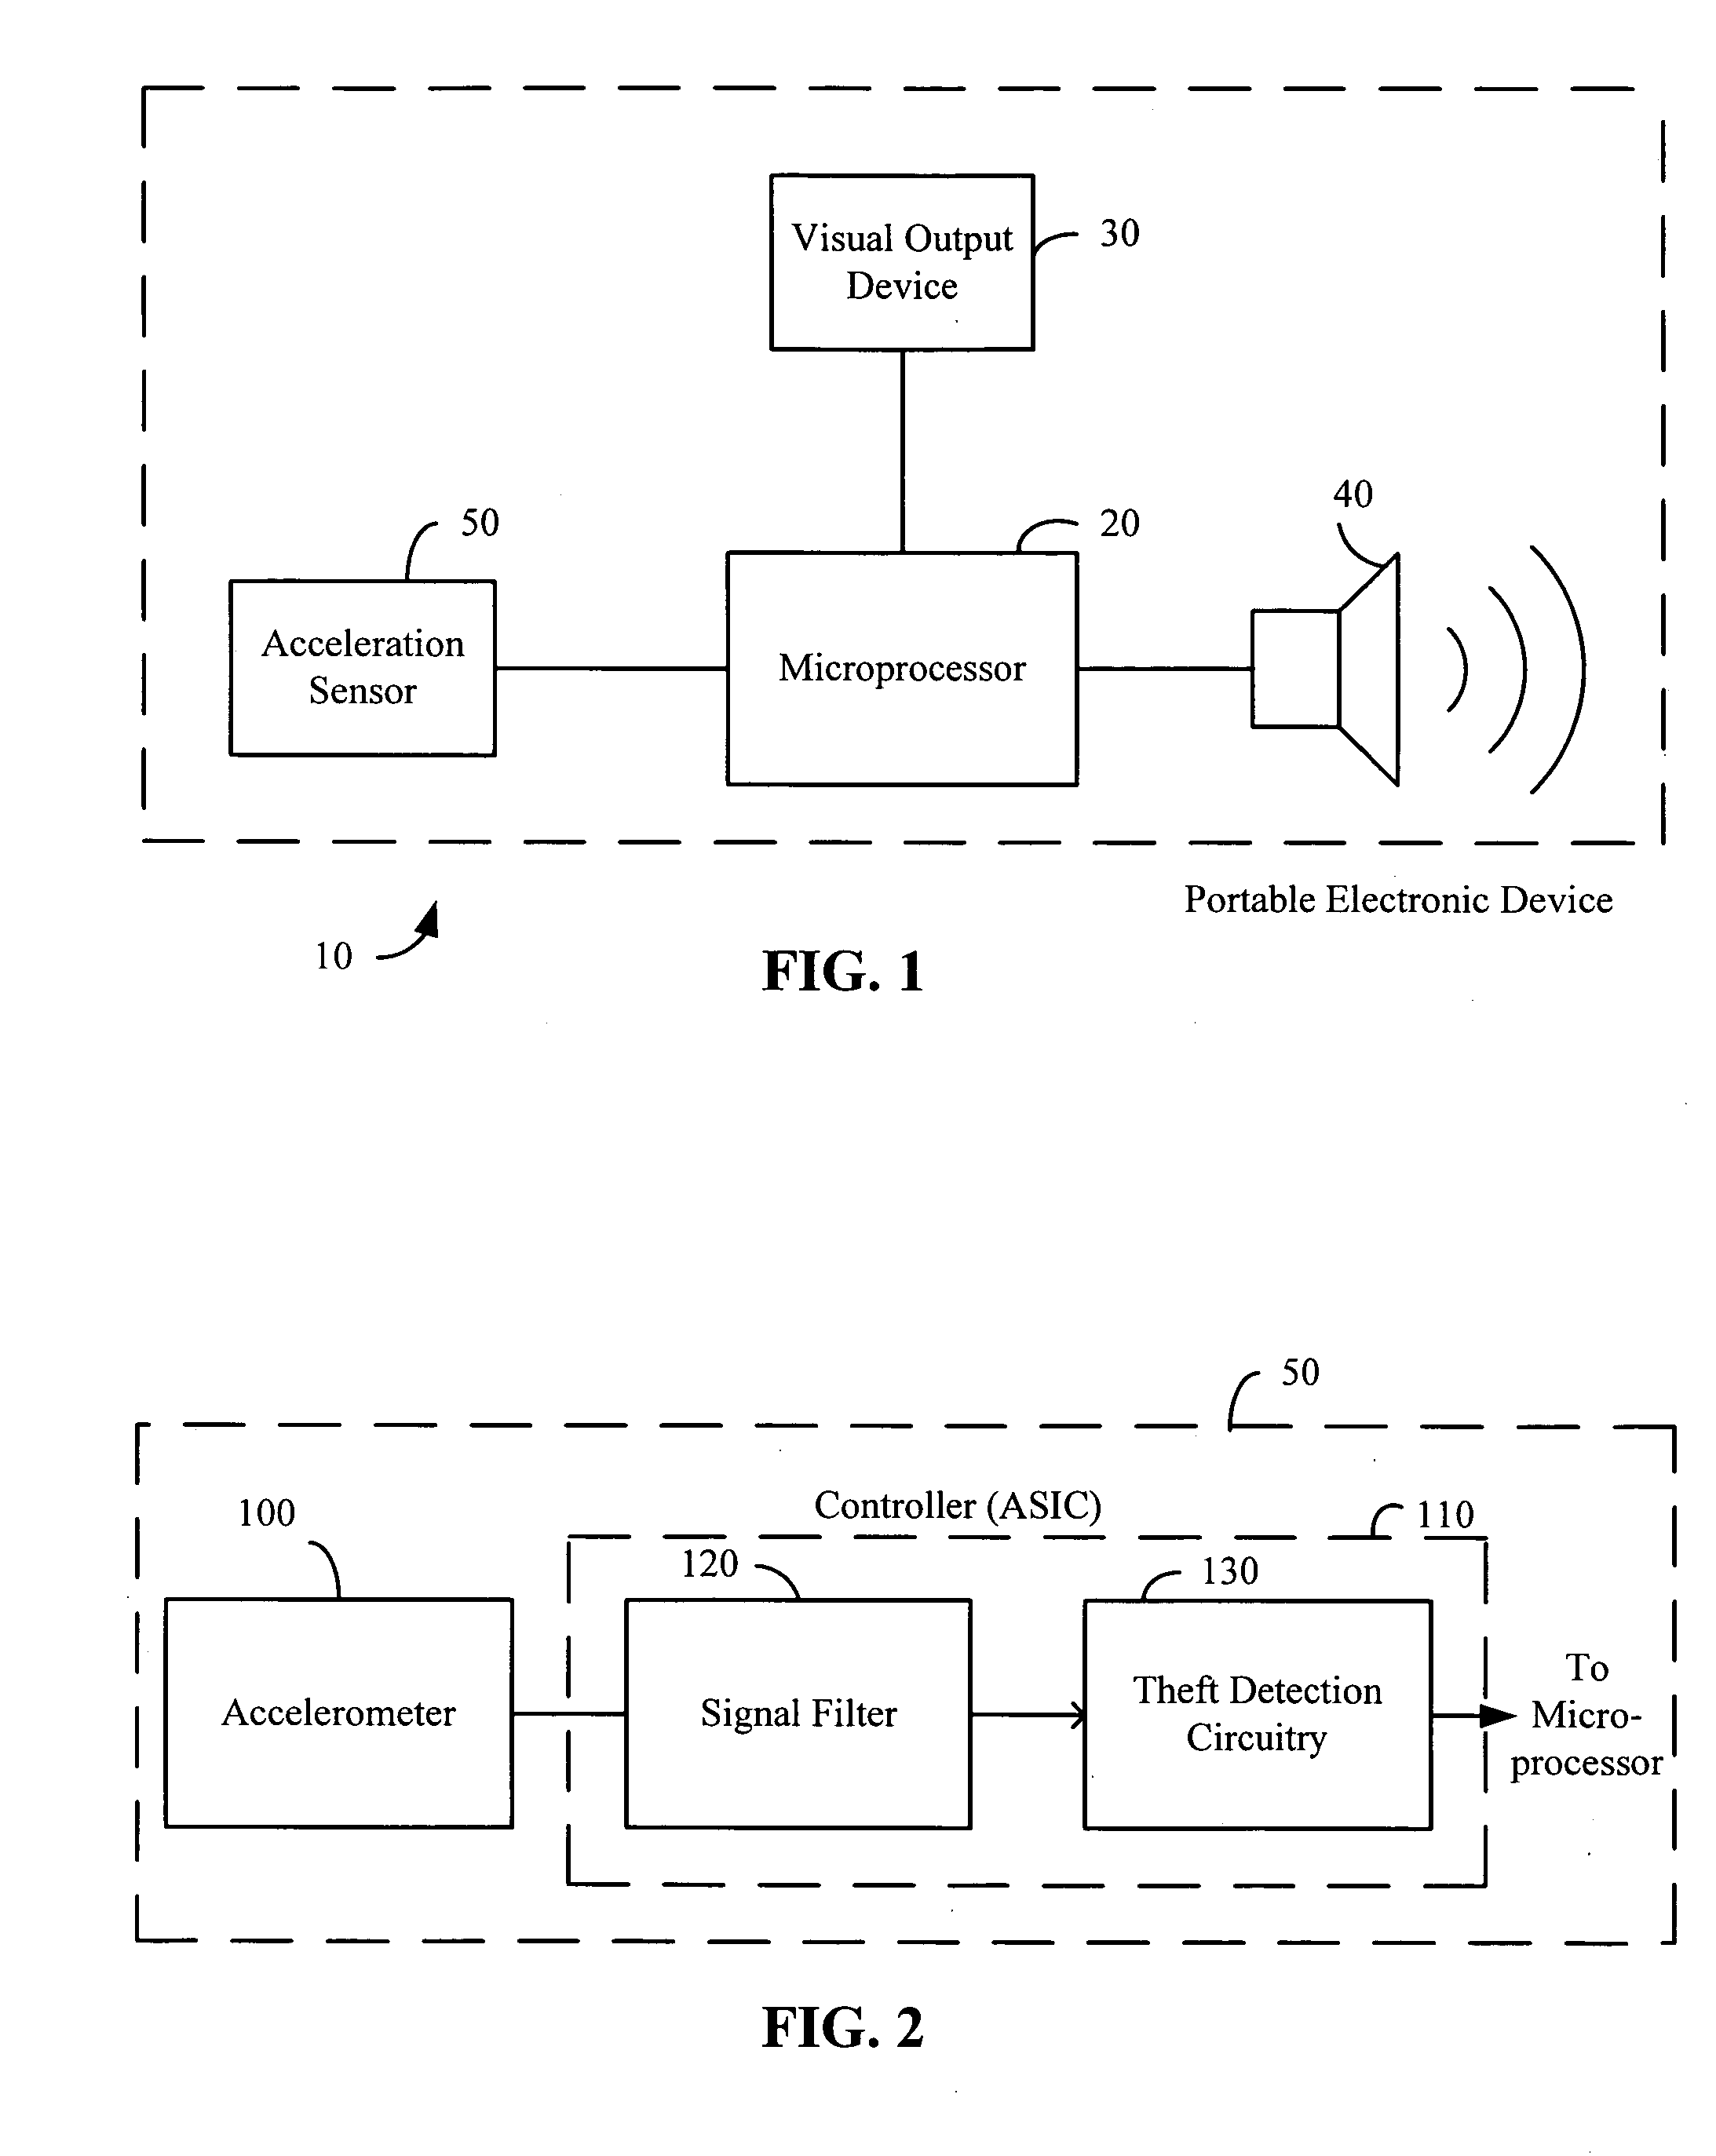 Acceleration-based theft detection system for portable electronic devices